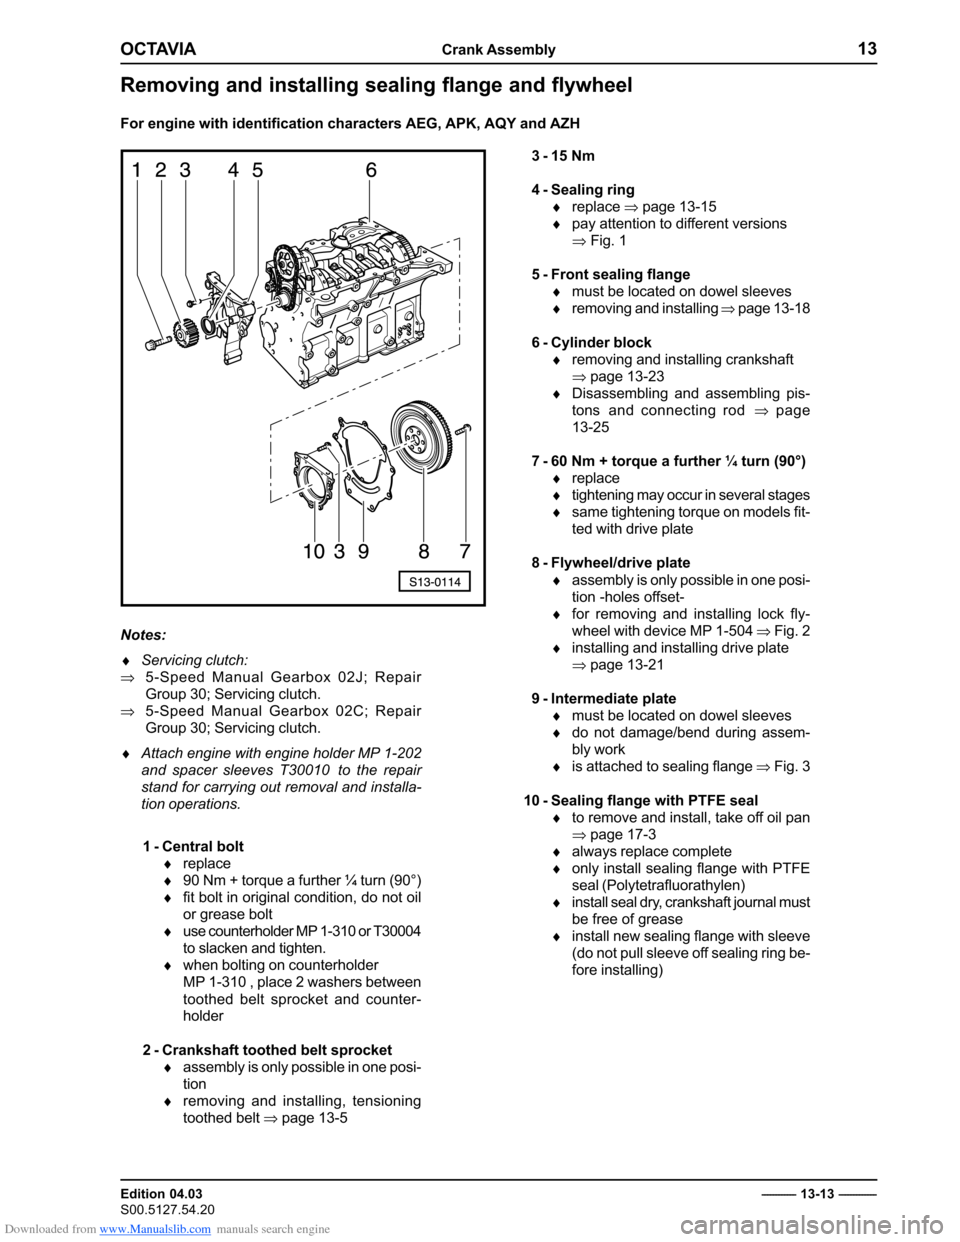 SKODA OCTAVIA 2000 1.G / (1U) 2.0 85kw Engine Owners Guide Downloaded from www.Manualslib.com manuals search engine �����������������������
������������� 
��������������
���������������������������������������������������
�������������������������������������